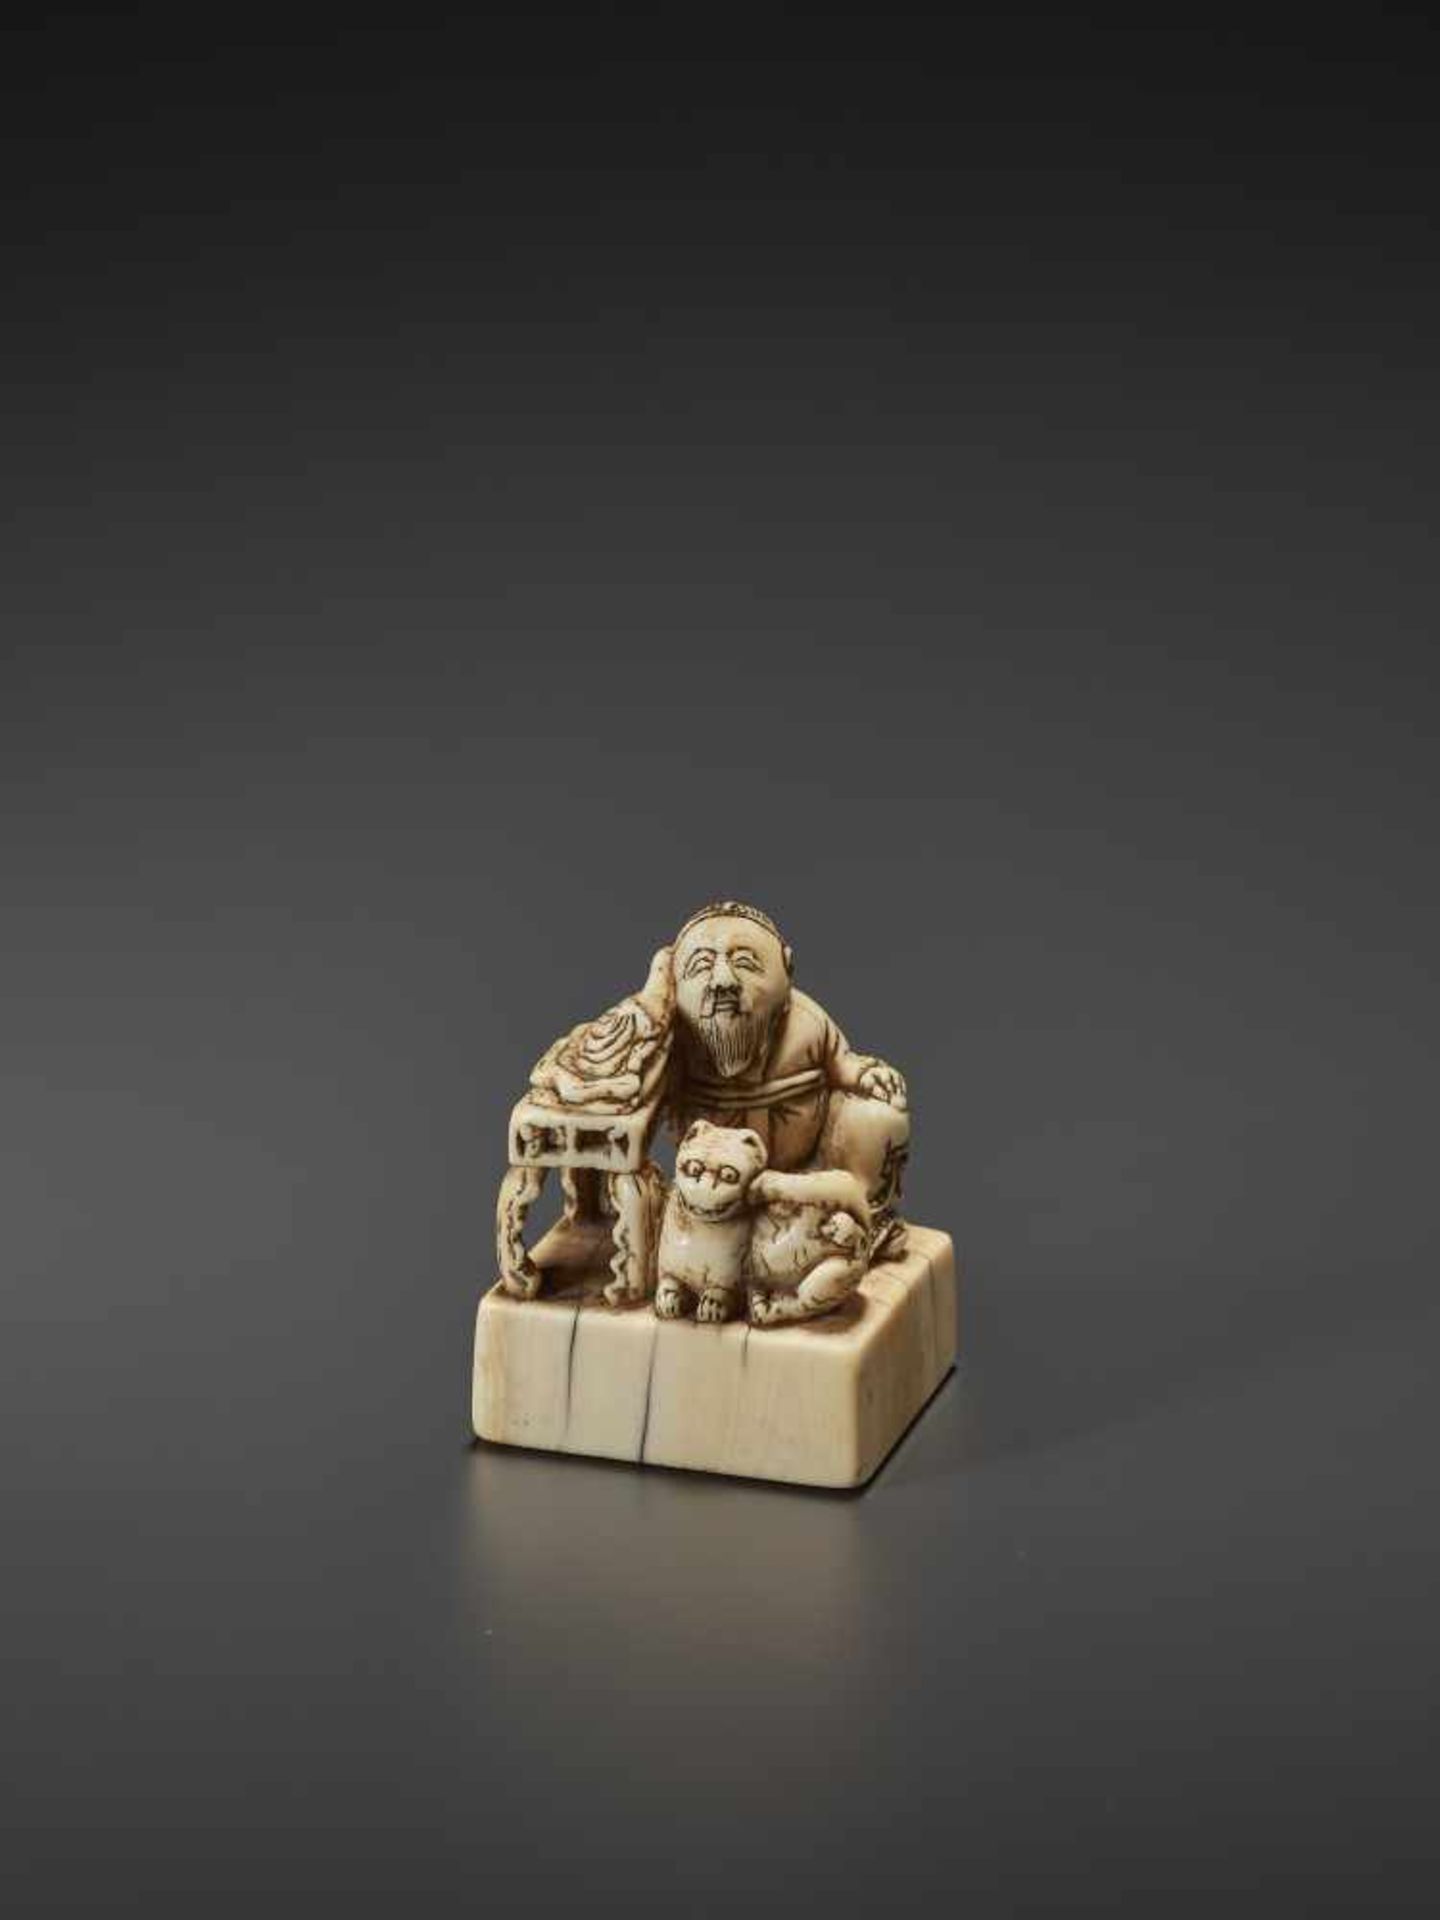 AN UNUSUAL AND EARLY IVORY NETSUKE OF A CHINESE SAGE WITH TIGER Unsigned, ivory netsukeJapan, 18th